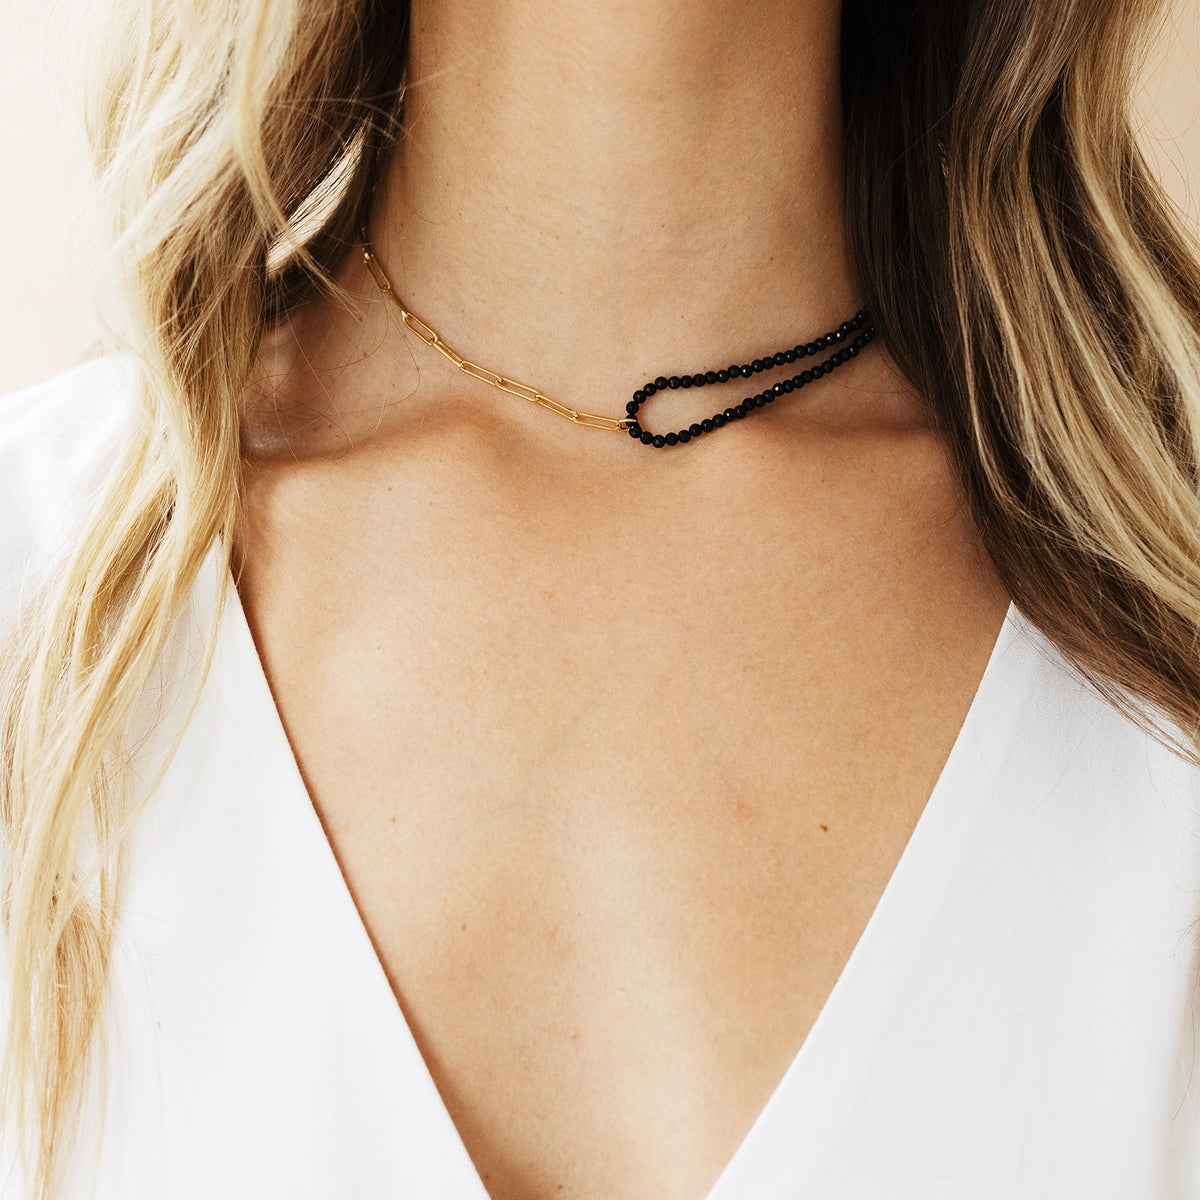 POISE BEADED LINK NECKLACE - BLACK ONYX &amp; GOLD - SO PRETTY CARA COTTER